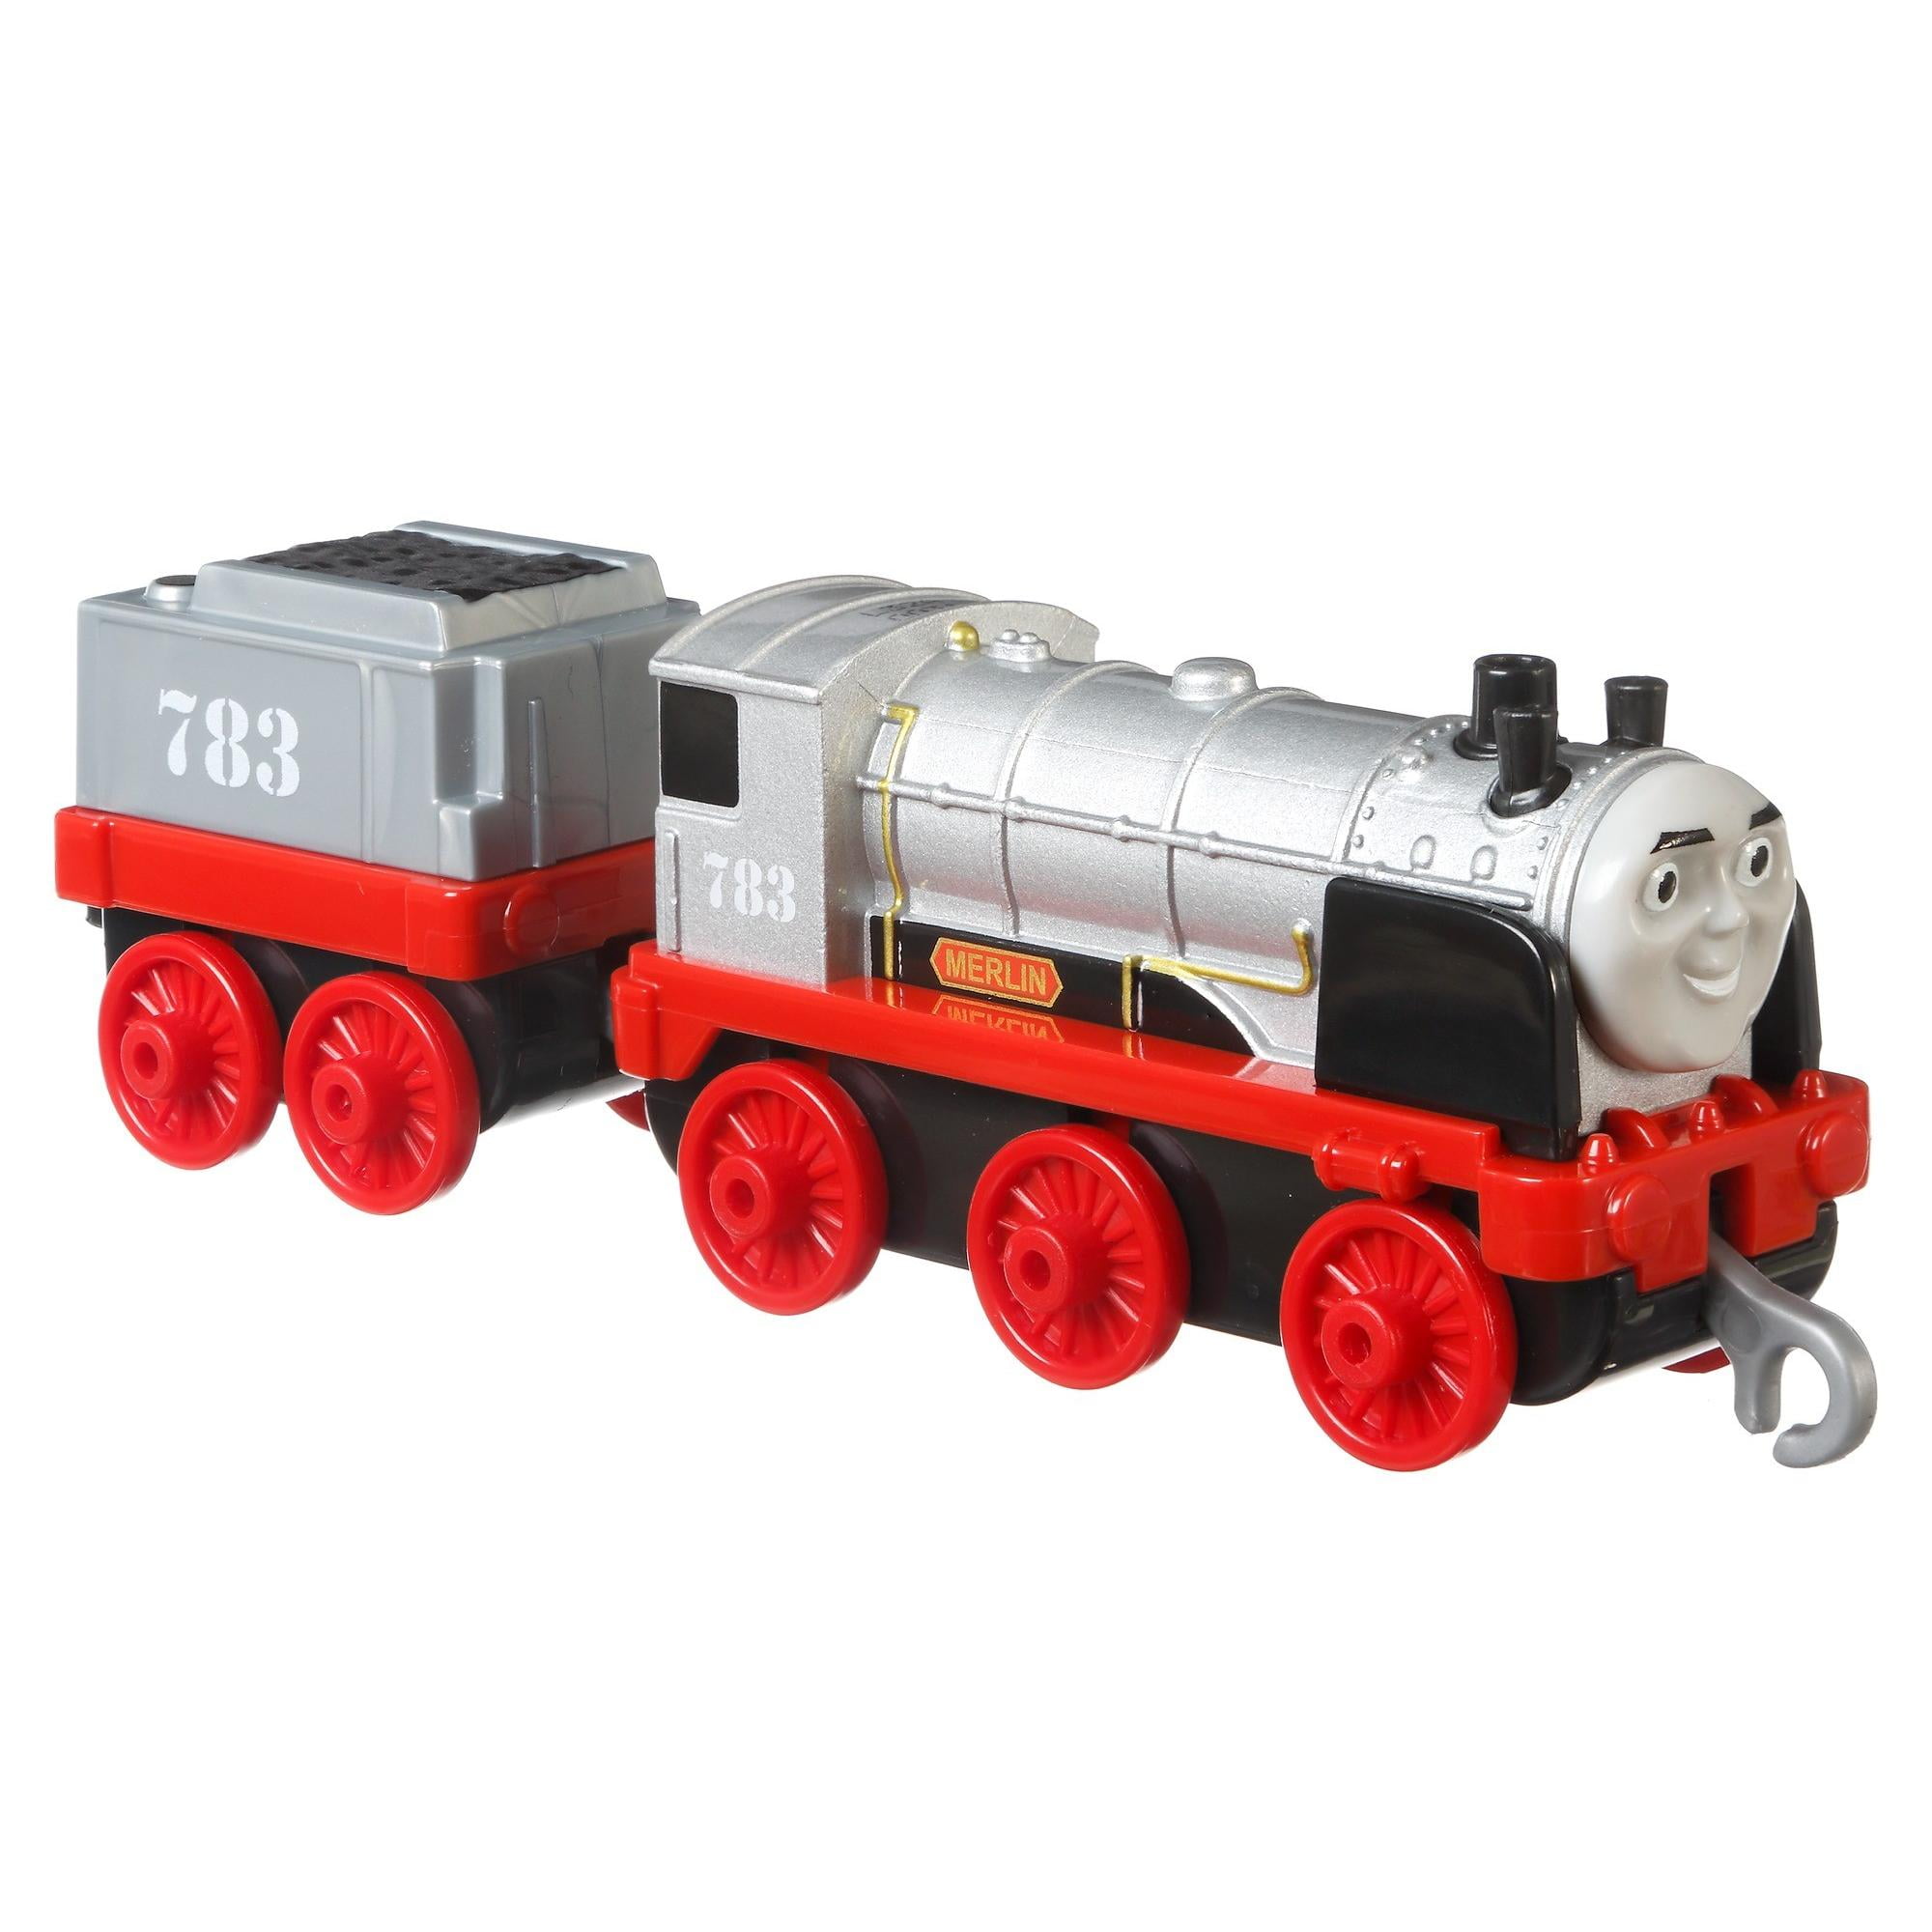 Details about   Thomas & Friends Wooden Railway Merlin the Invisible 